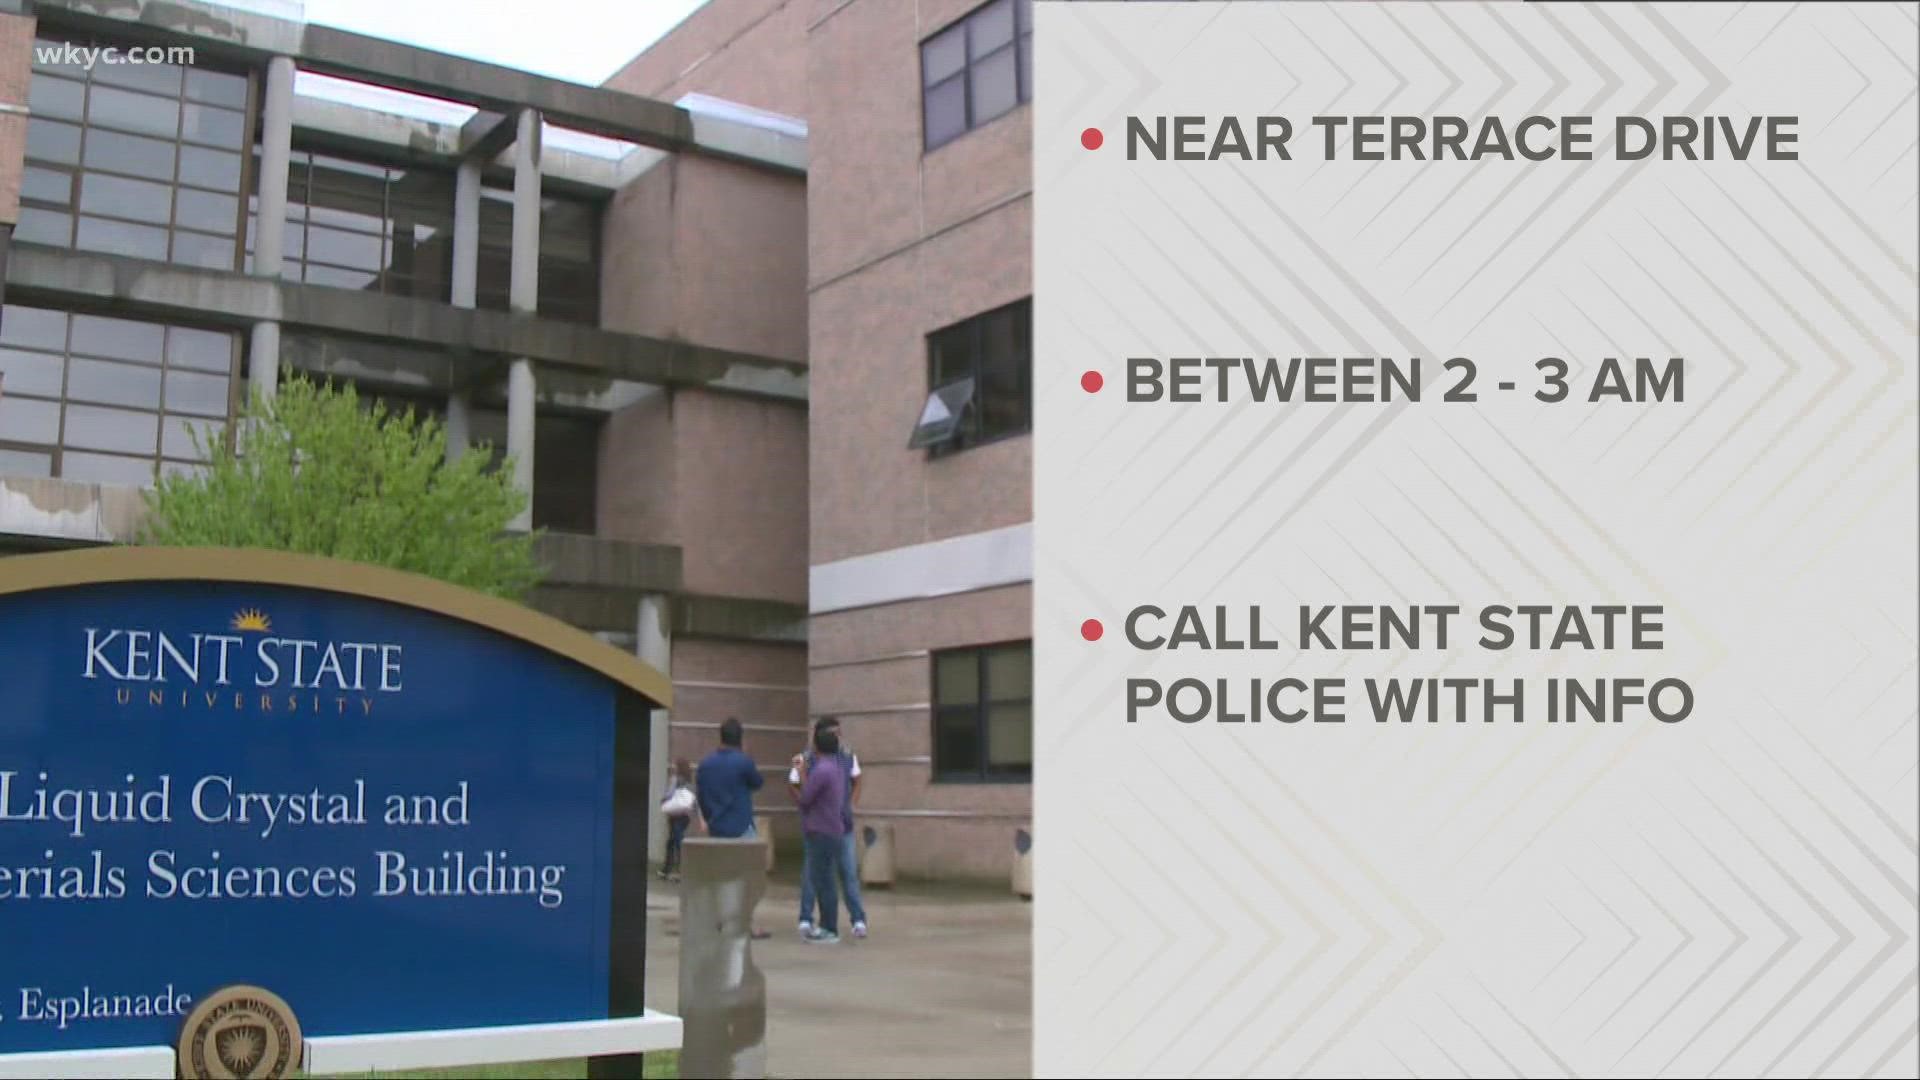 Contact Kent State Police at (330) 672-3070 if you have any information.